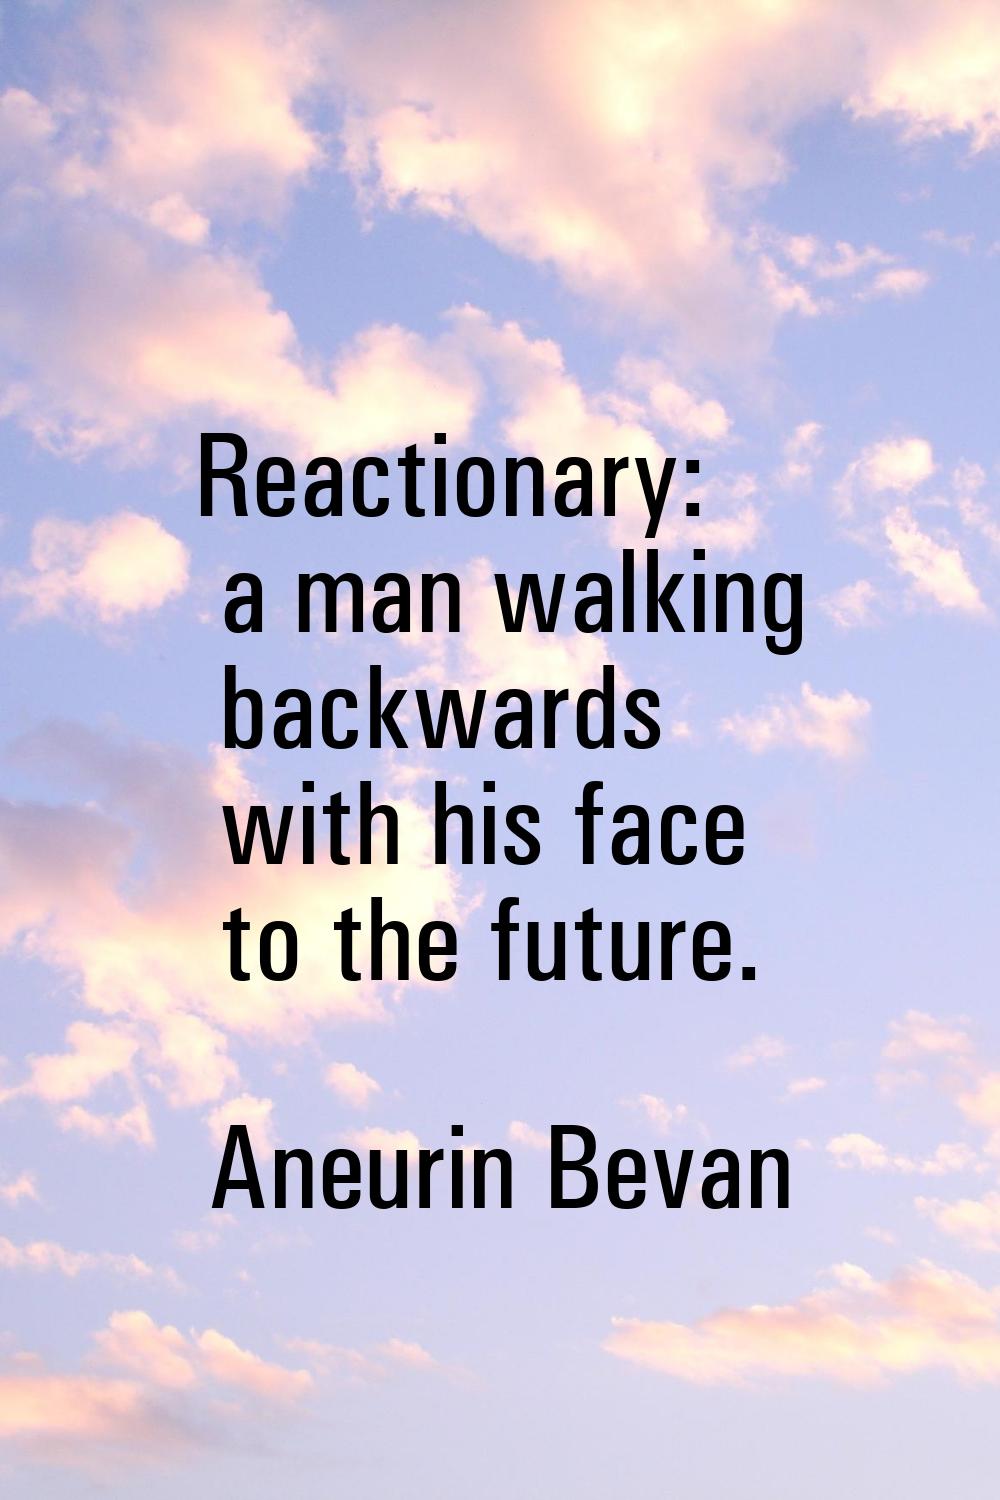 Reactionary: a man walking backwards with his face to the future.